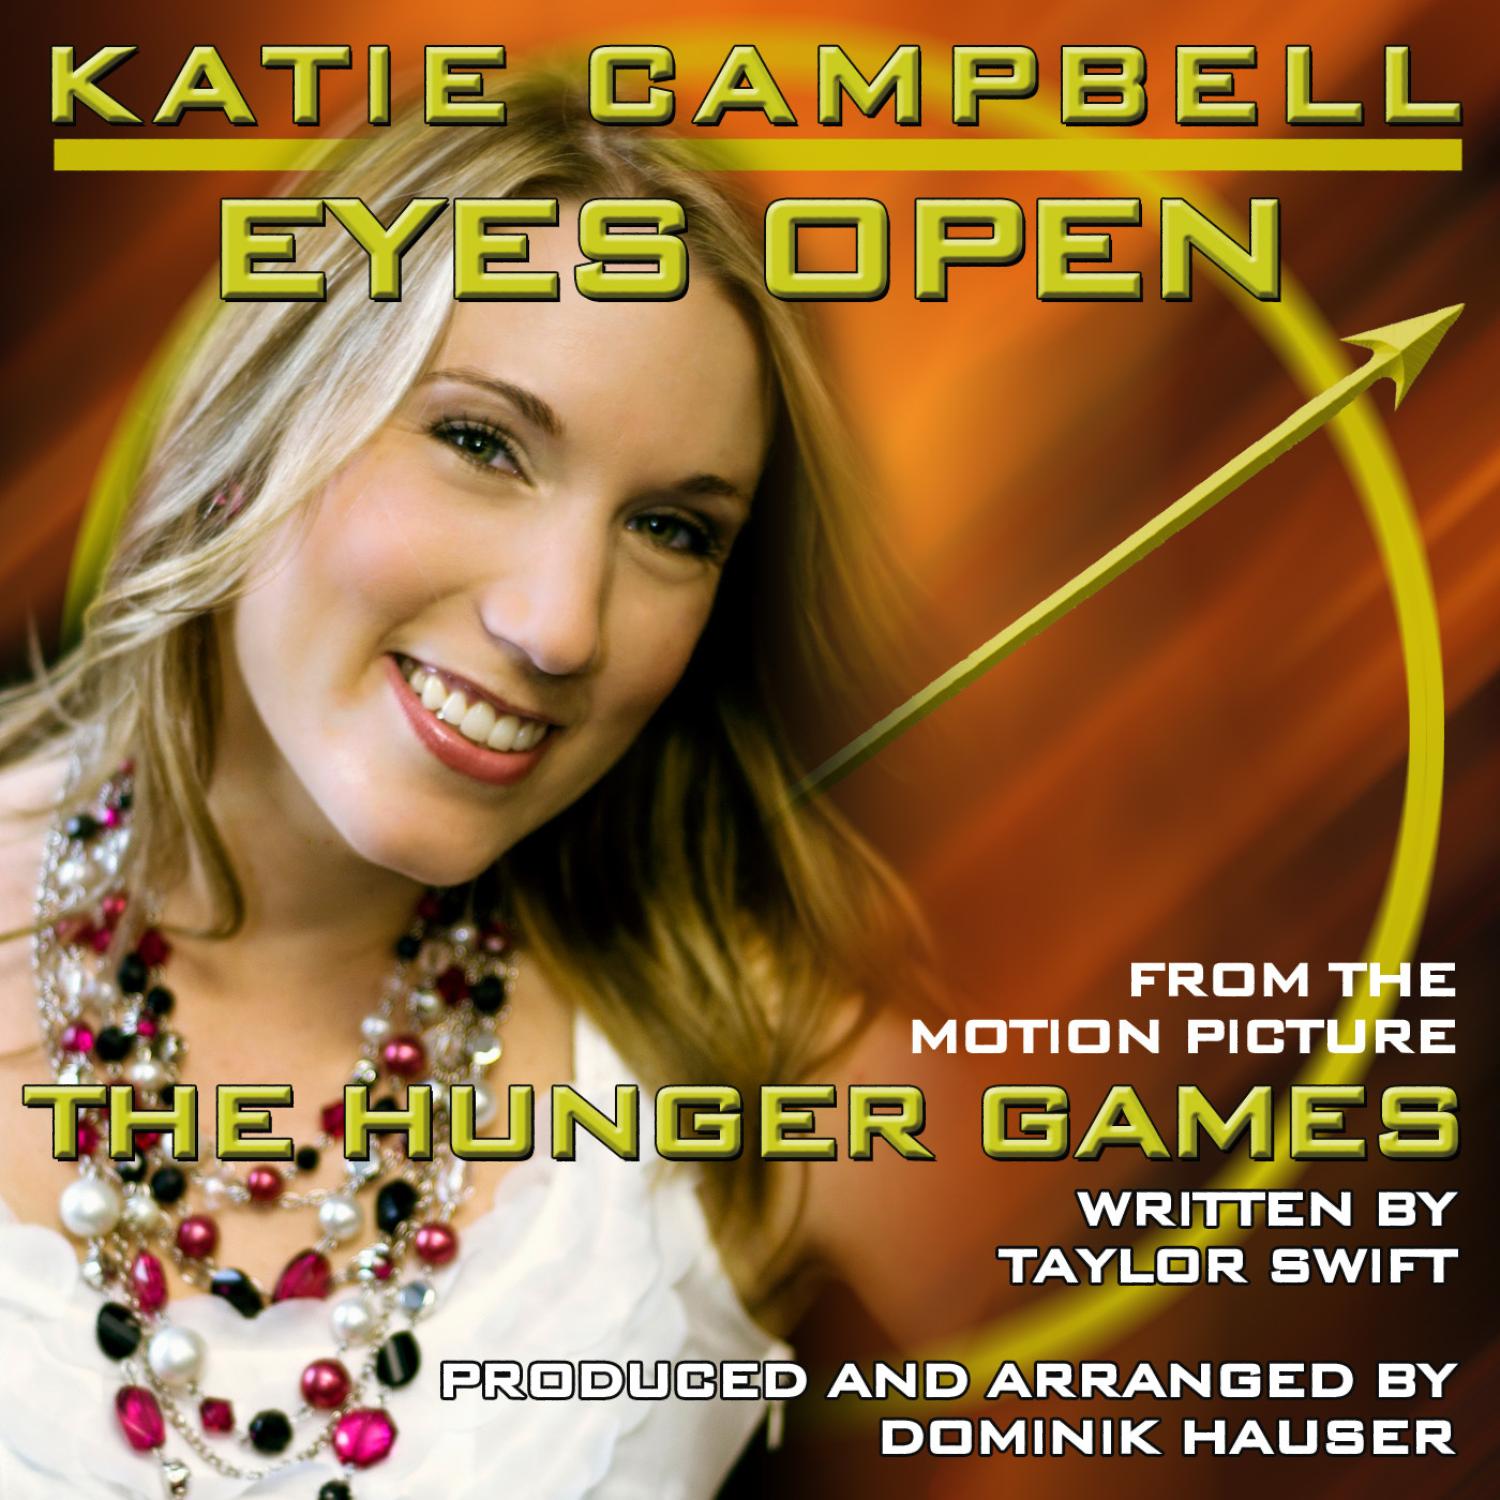 The Hunger Games - "Eyes Open" (Taylor Swift)